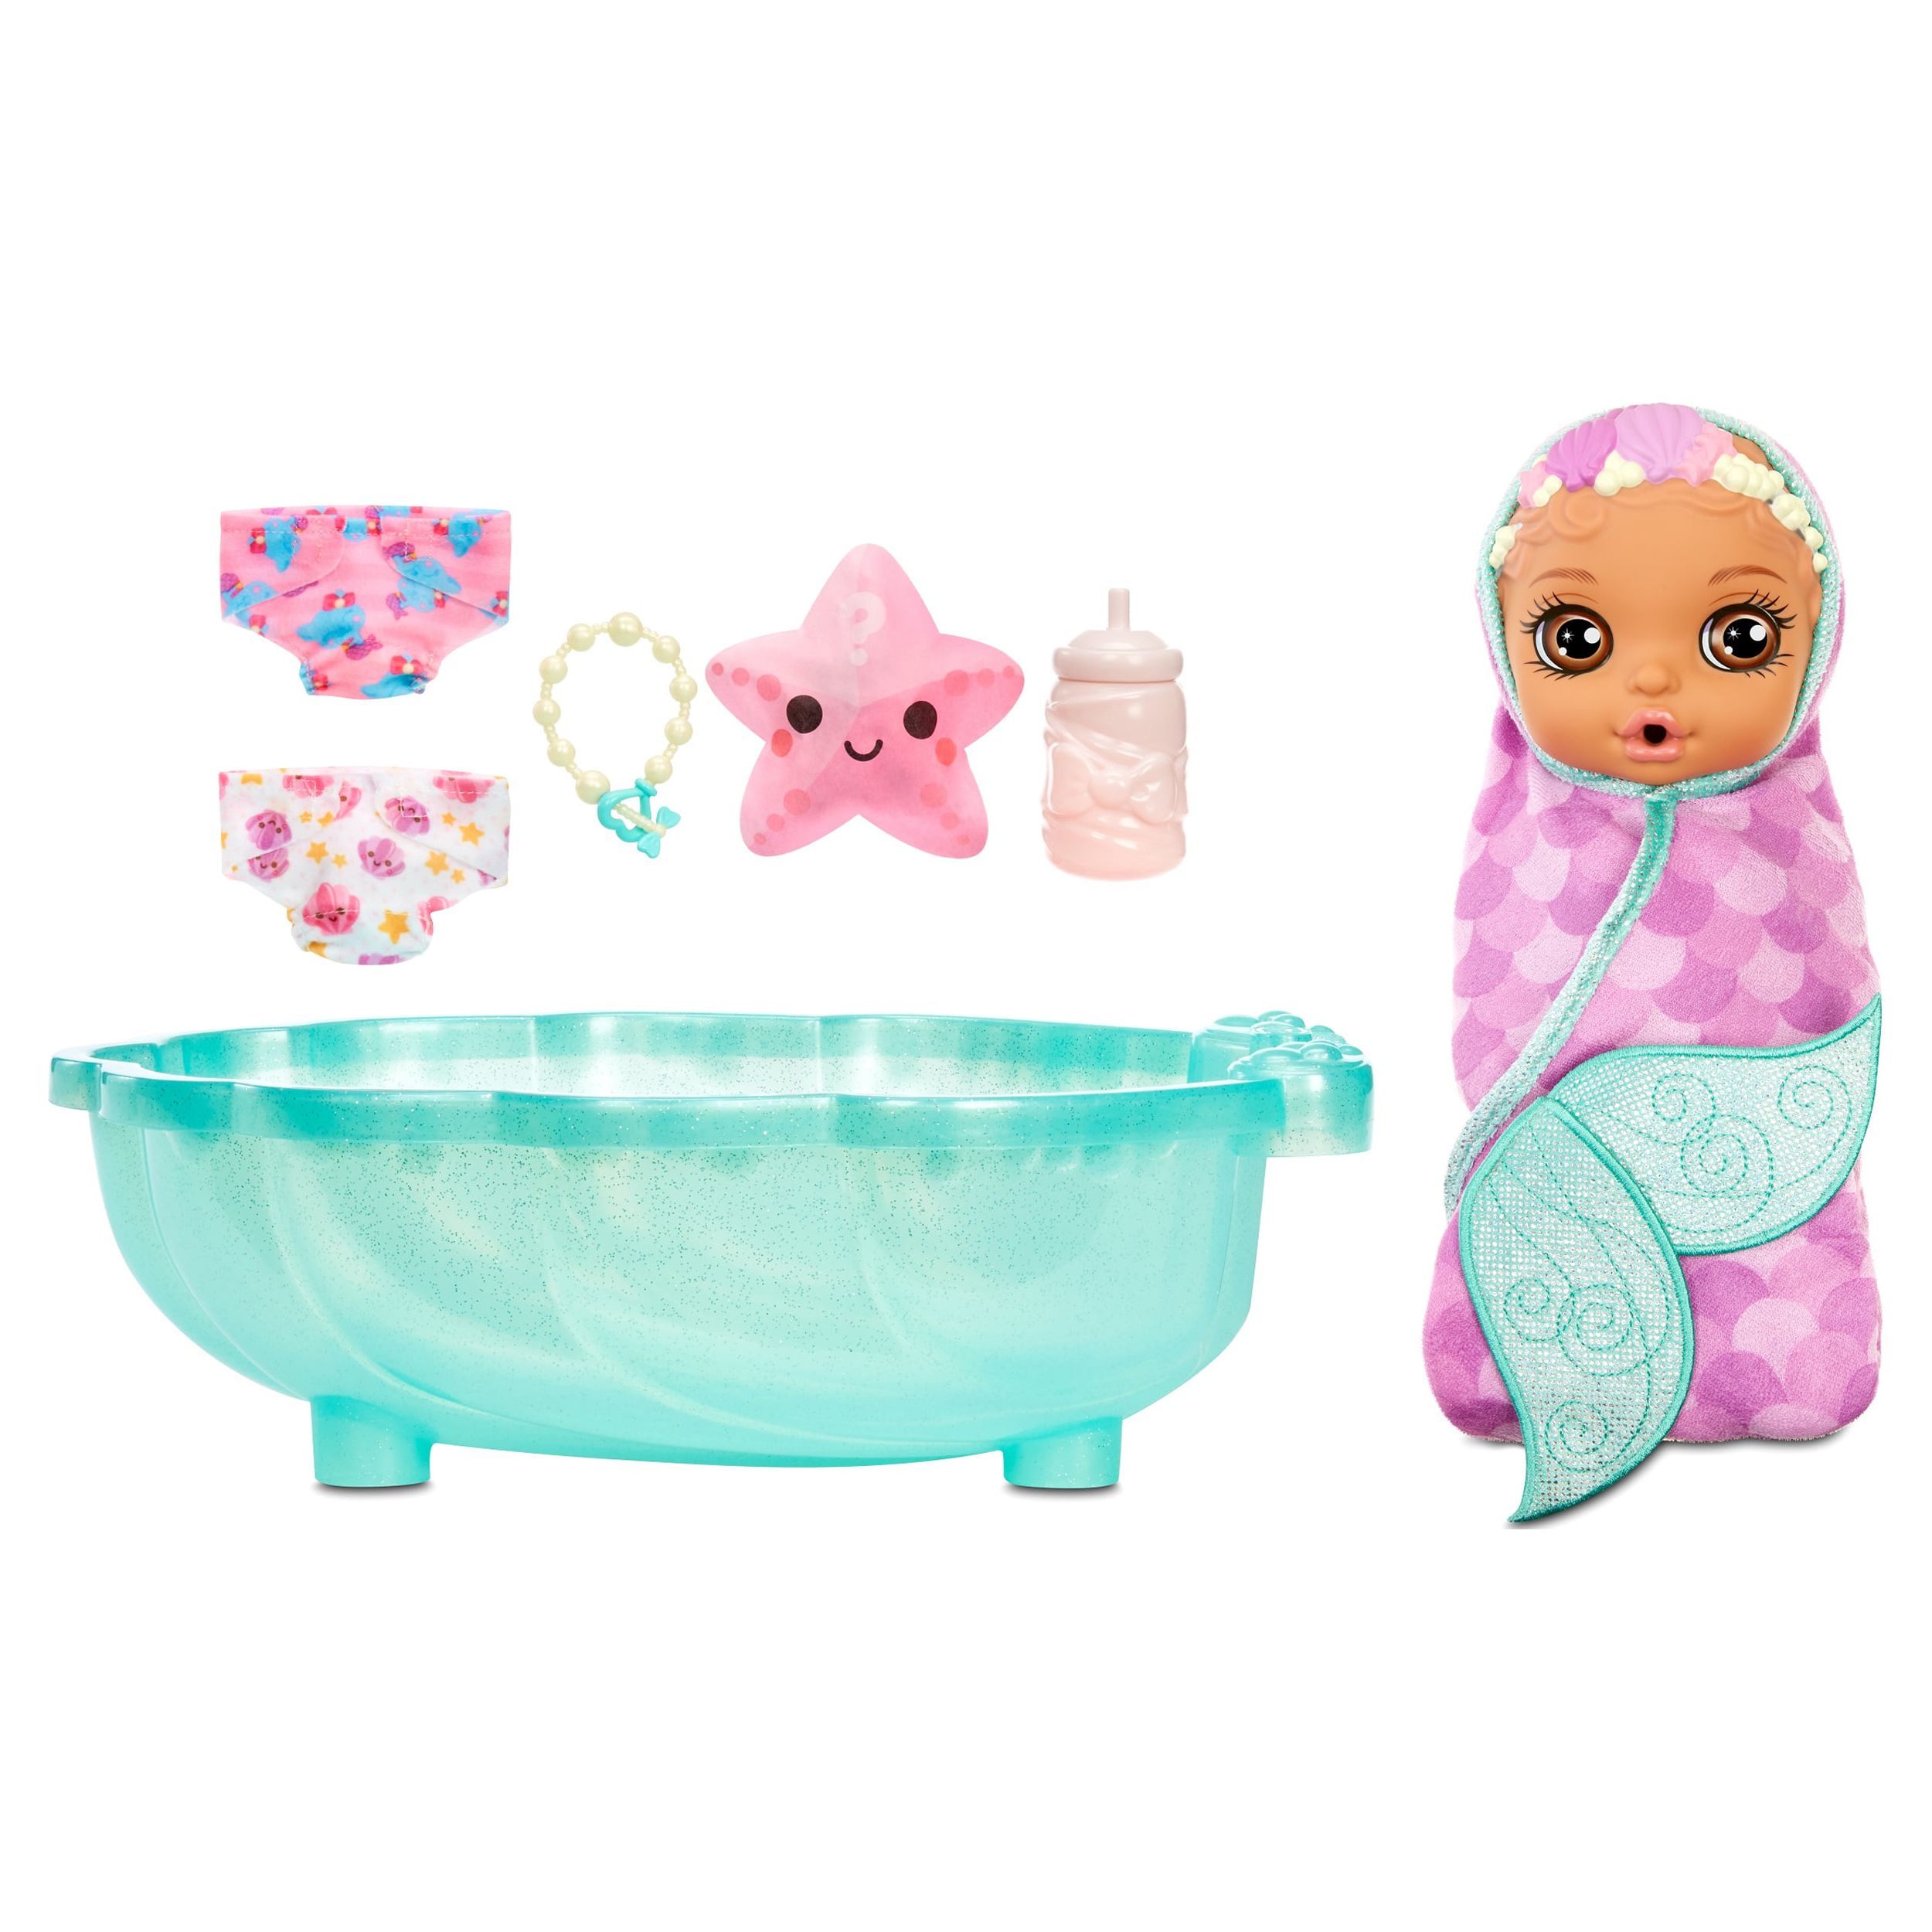 BABY born Surprise Mermaid Surprise – Baby Doll with Purple Towel and 20+ Surprises - image 1 of 7